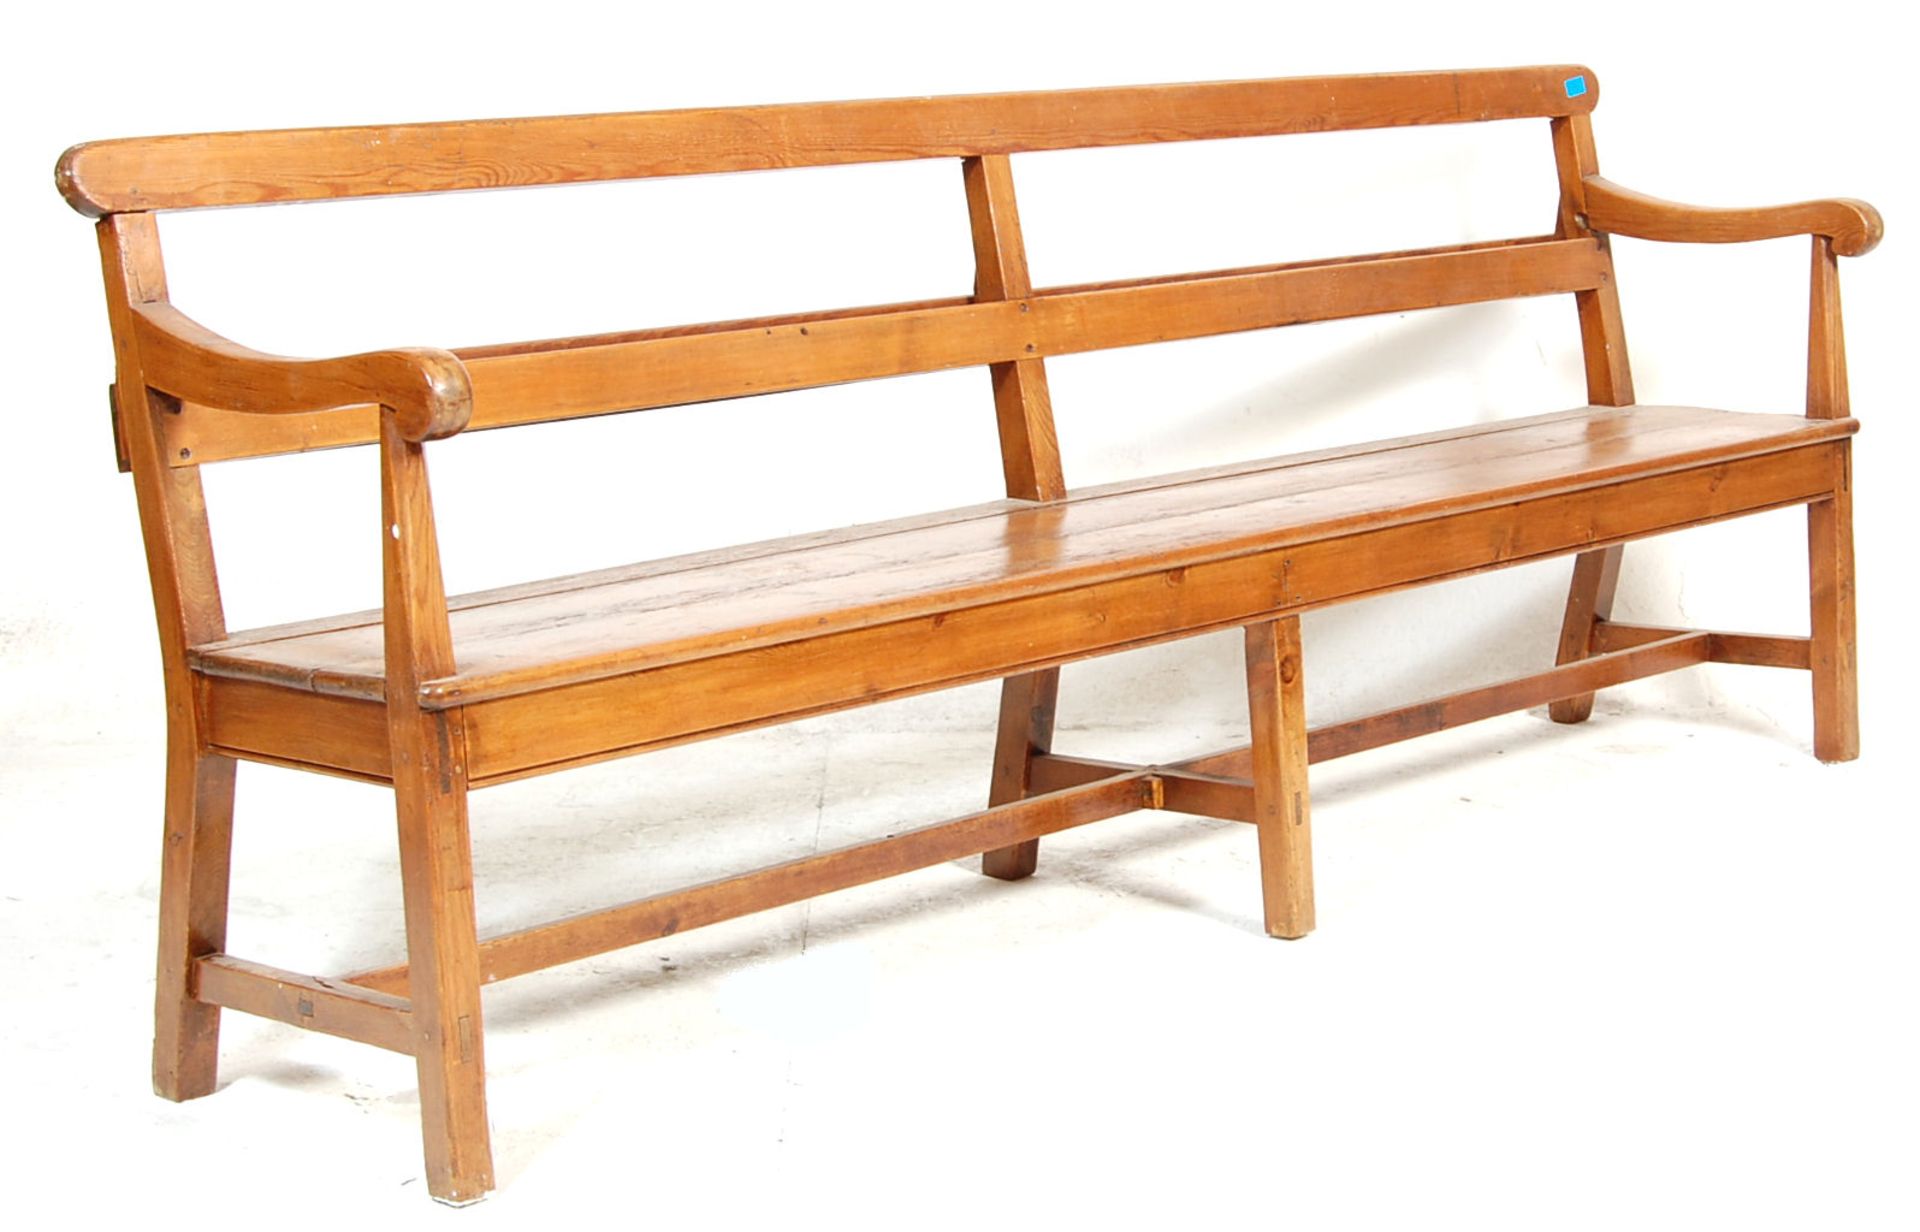 An early 20th century Railway / bus station pew bench with scroll armrest, plank seat, bentwood